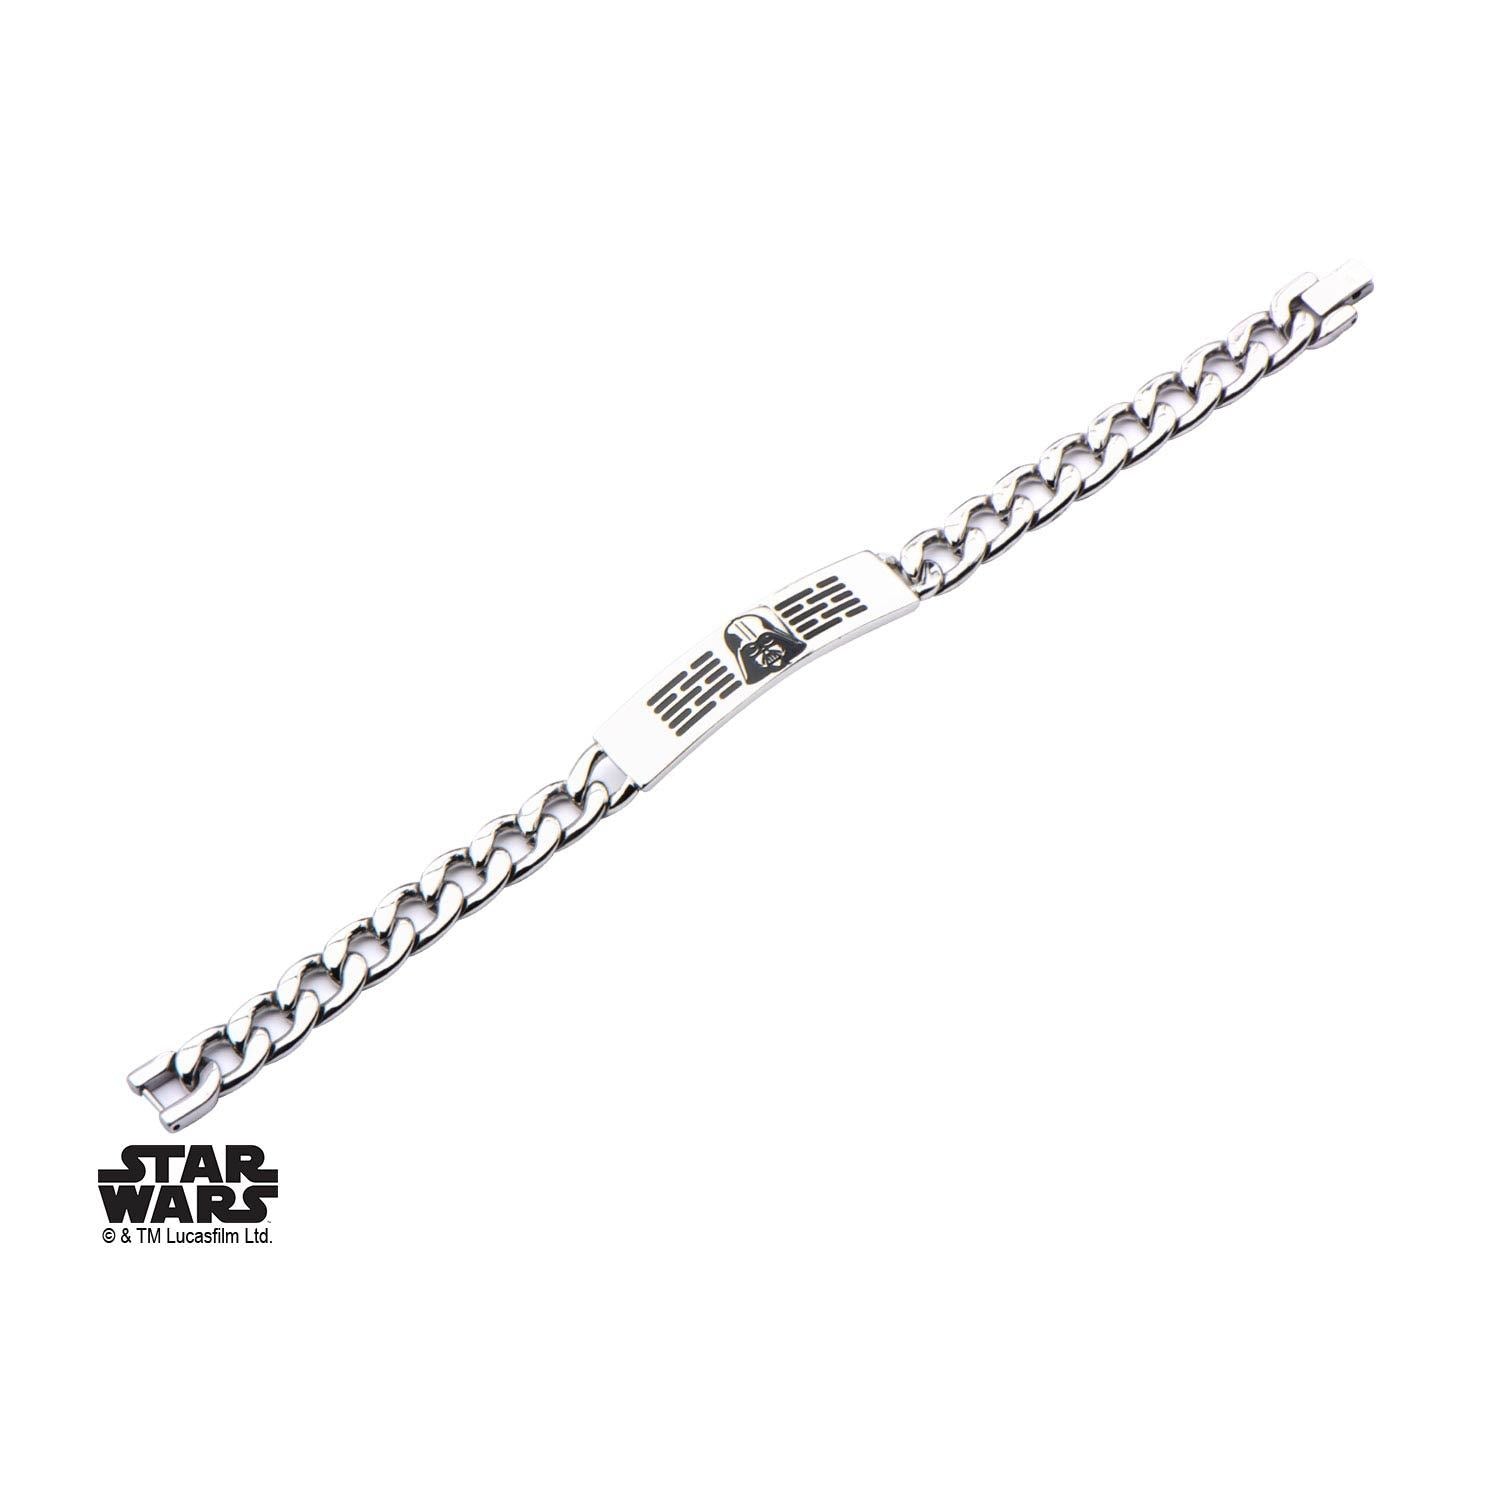 Star Wars Darth Vader ID Curb Chain Bracelet [NOT AVAILABLE]